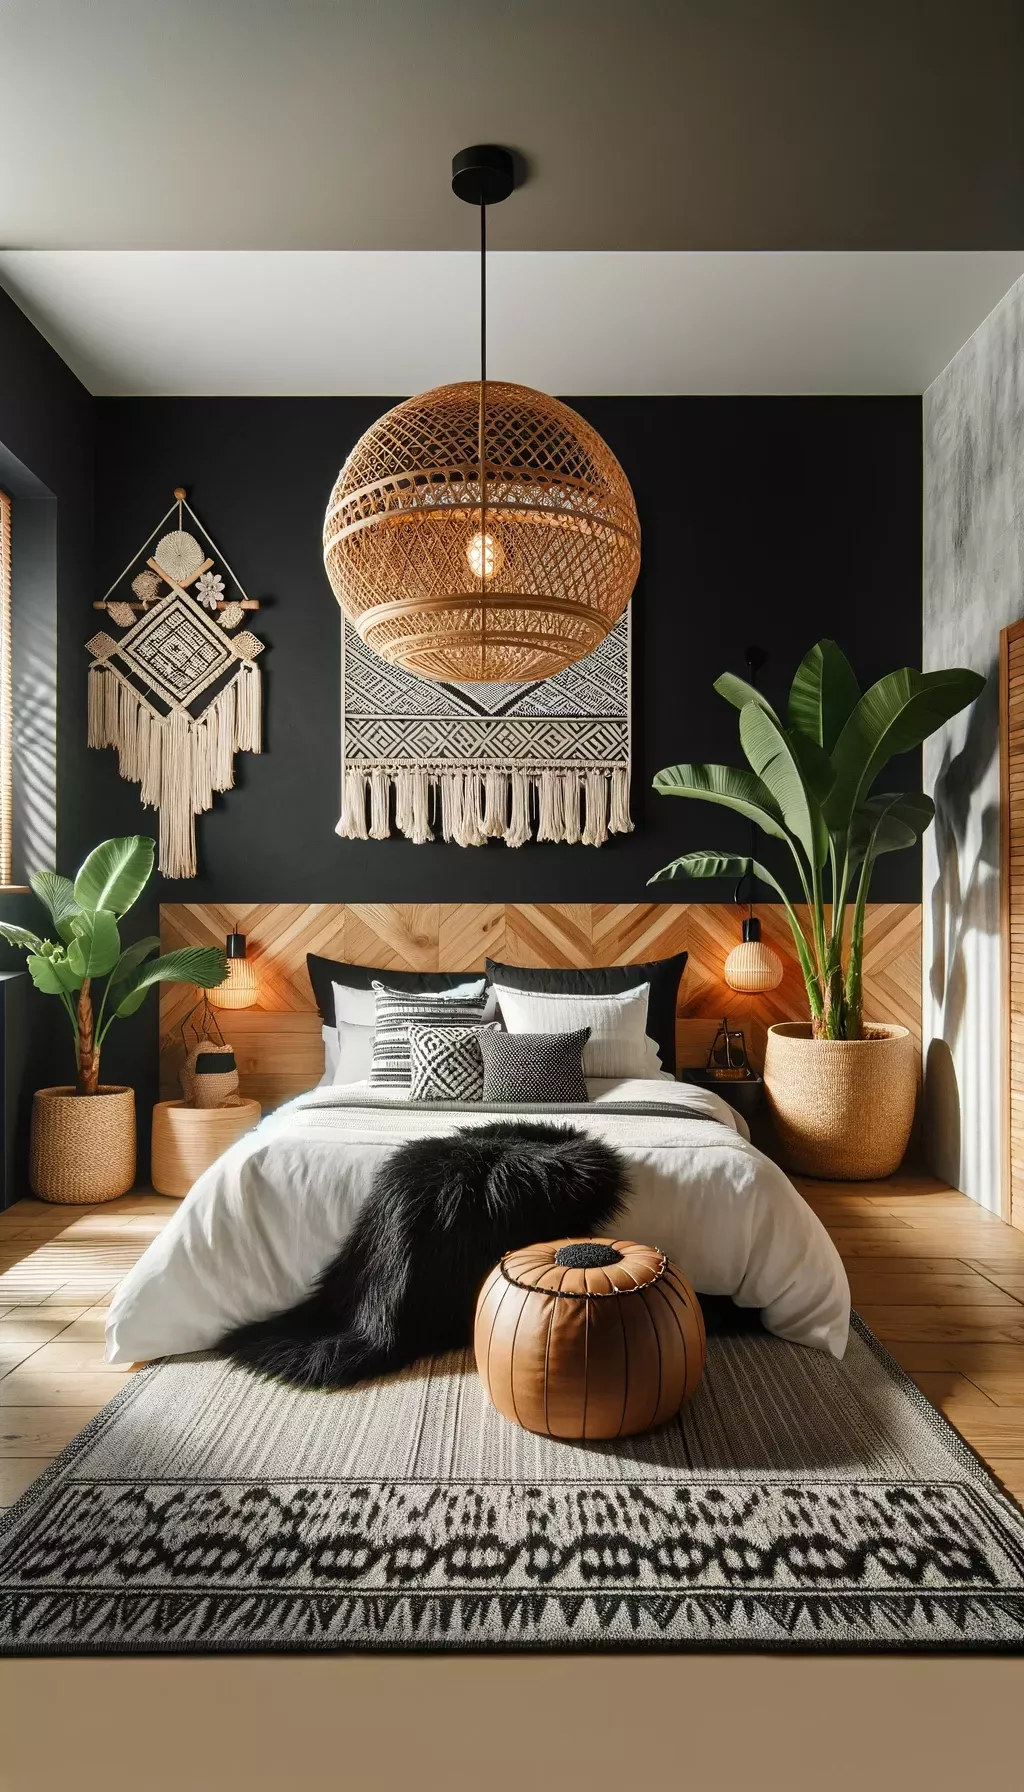 Diy Bohemian Bedroom Decoration Create a Stunning Bohemian Vibe in Your Bedroom with These Easy Tips